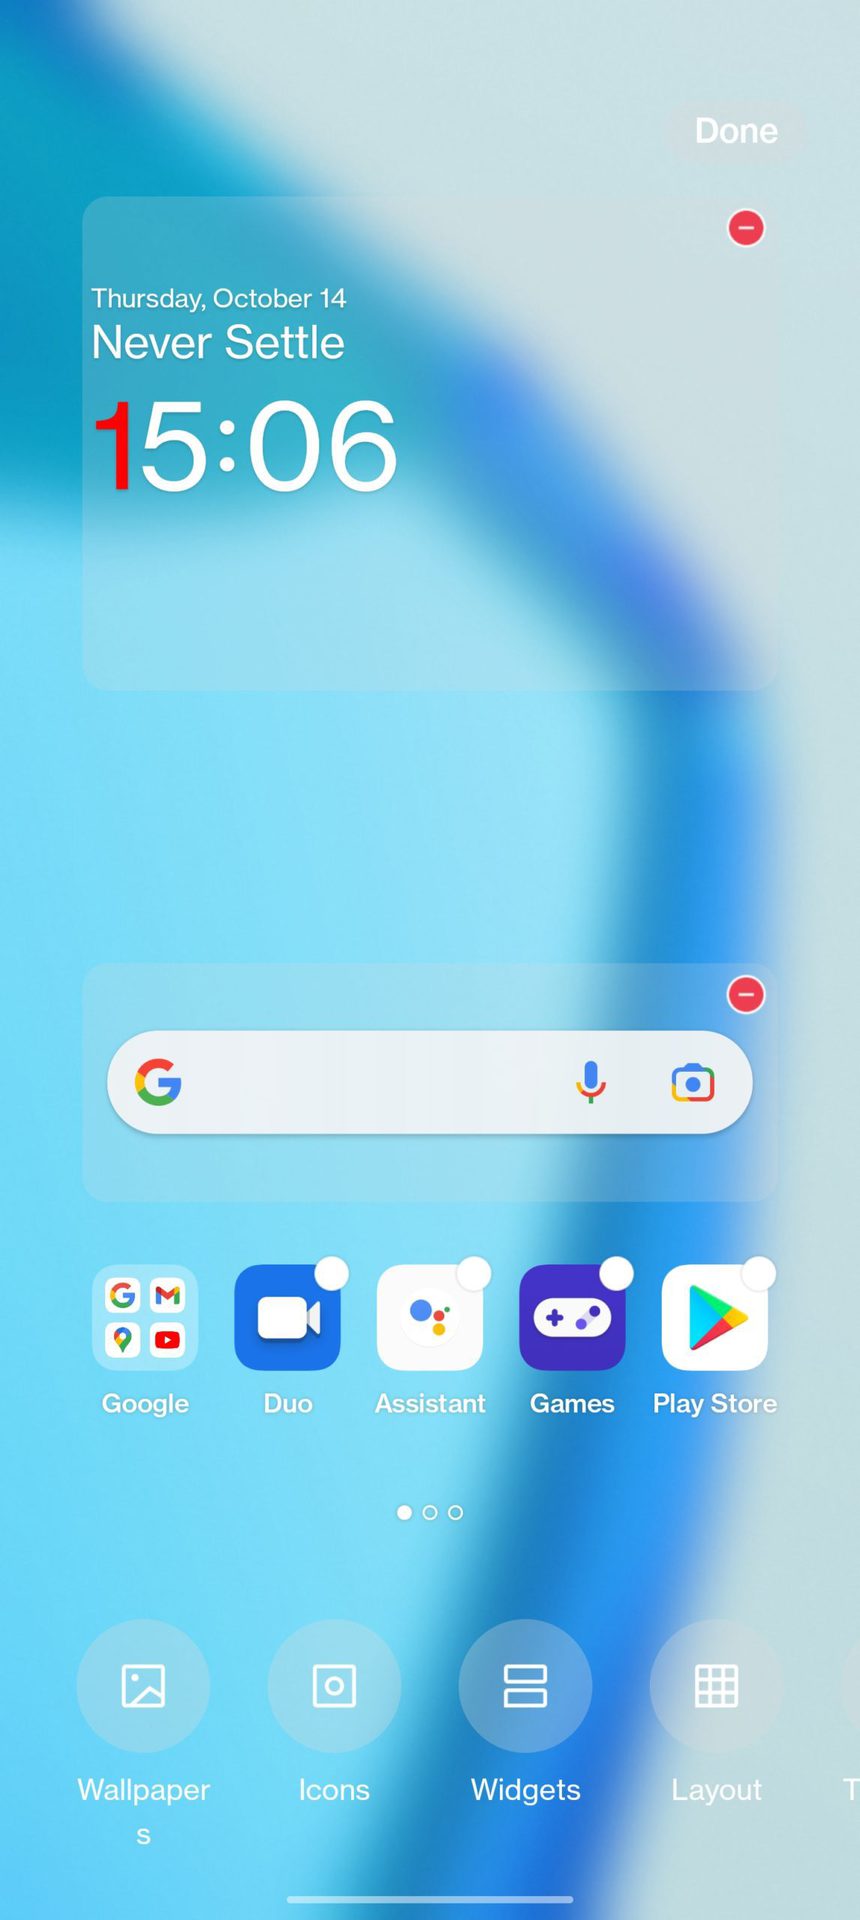 Oxygen OS 12 Beta Screenshot 1 showing app icons and search bar